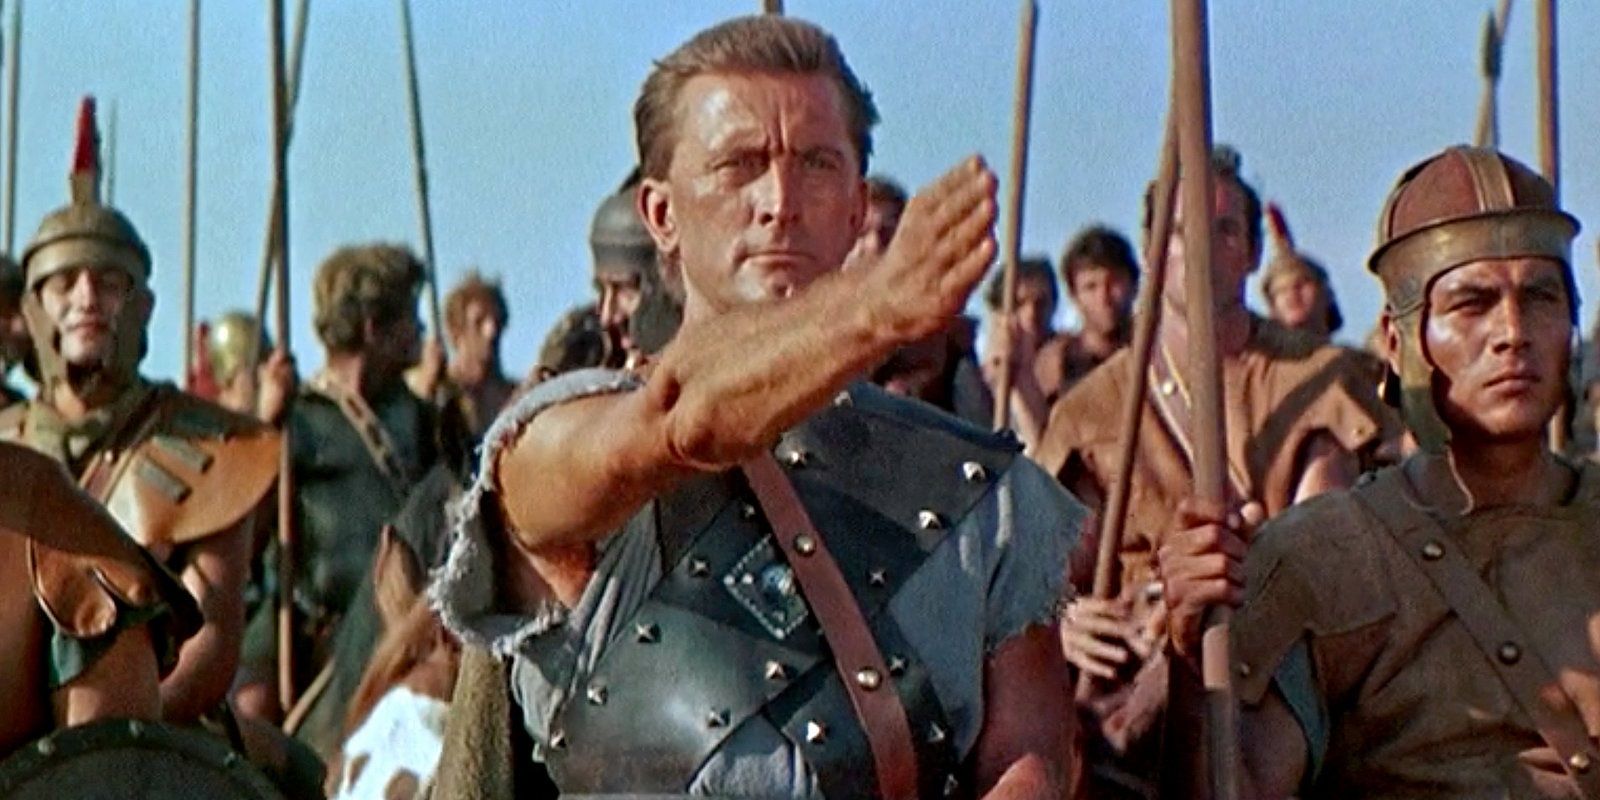 Spartacus gestures forward with his arm as soldiers stand behind him in Spartacus.